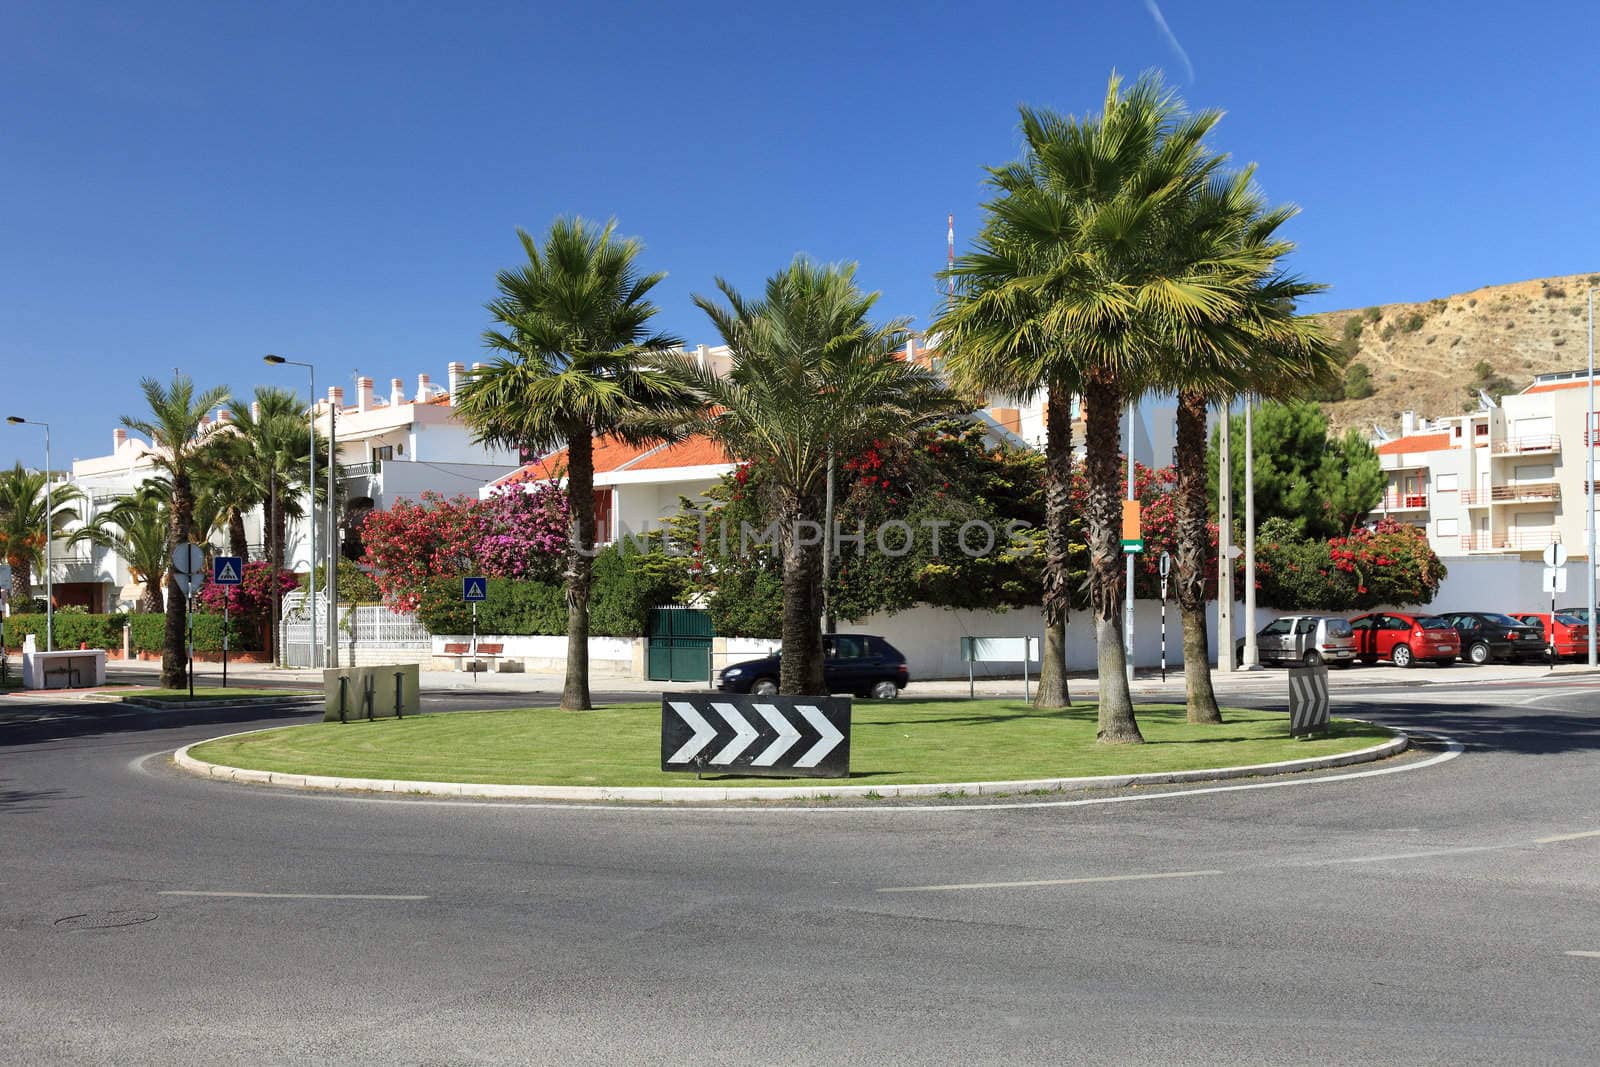 Circle crossroad with palms in Lisbon, Portugal.